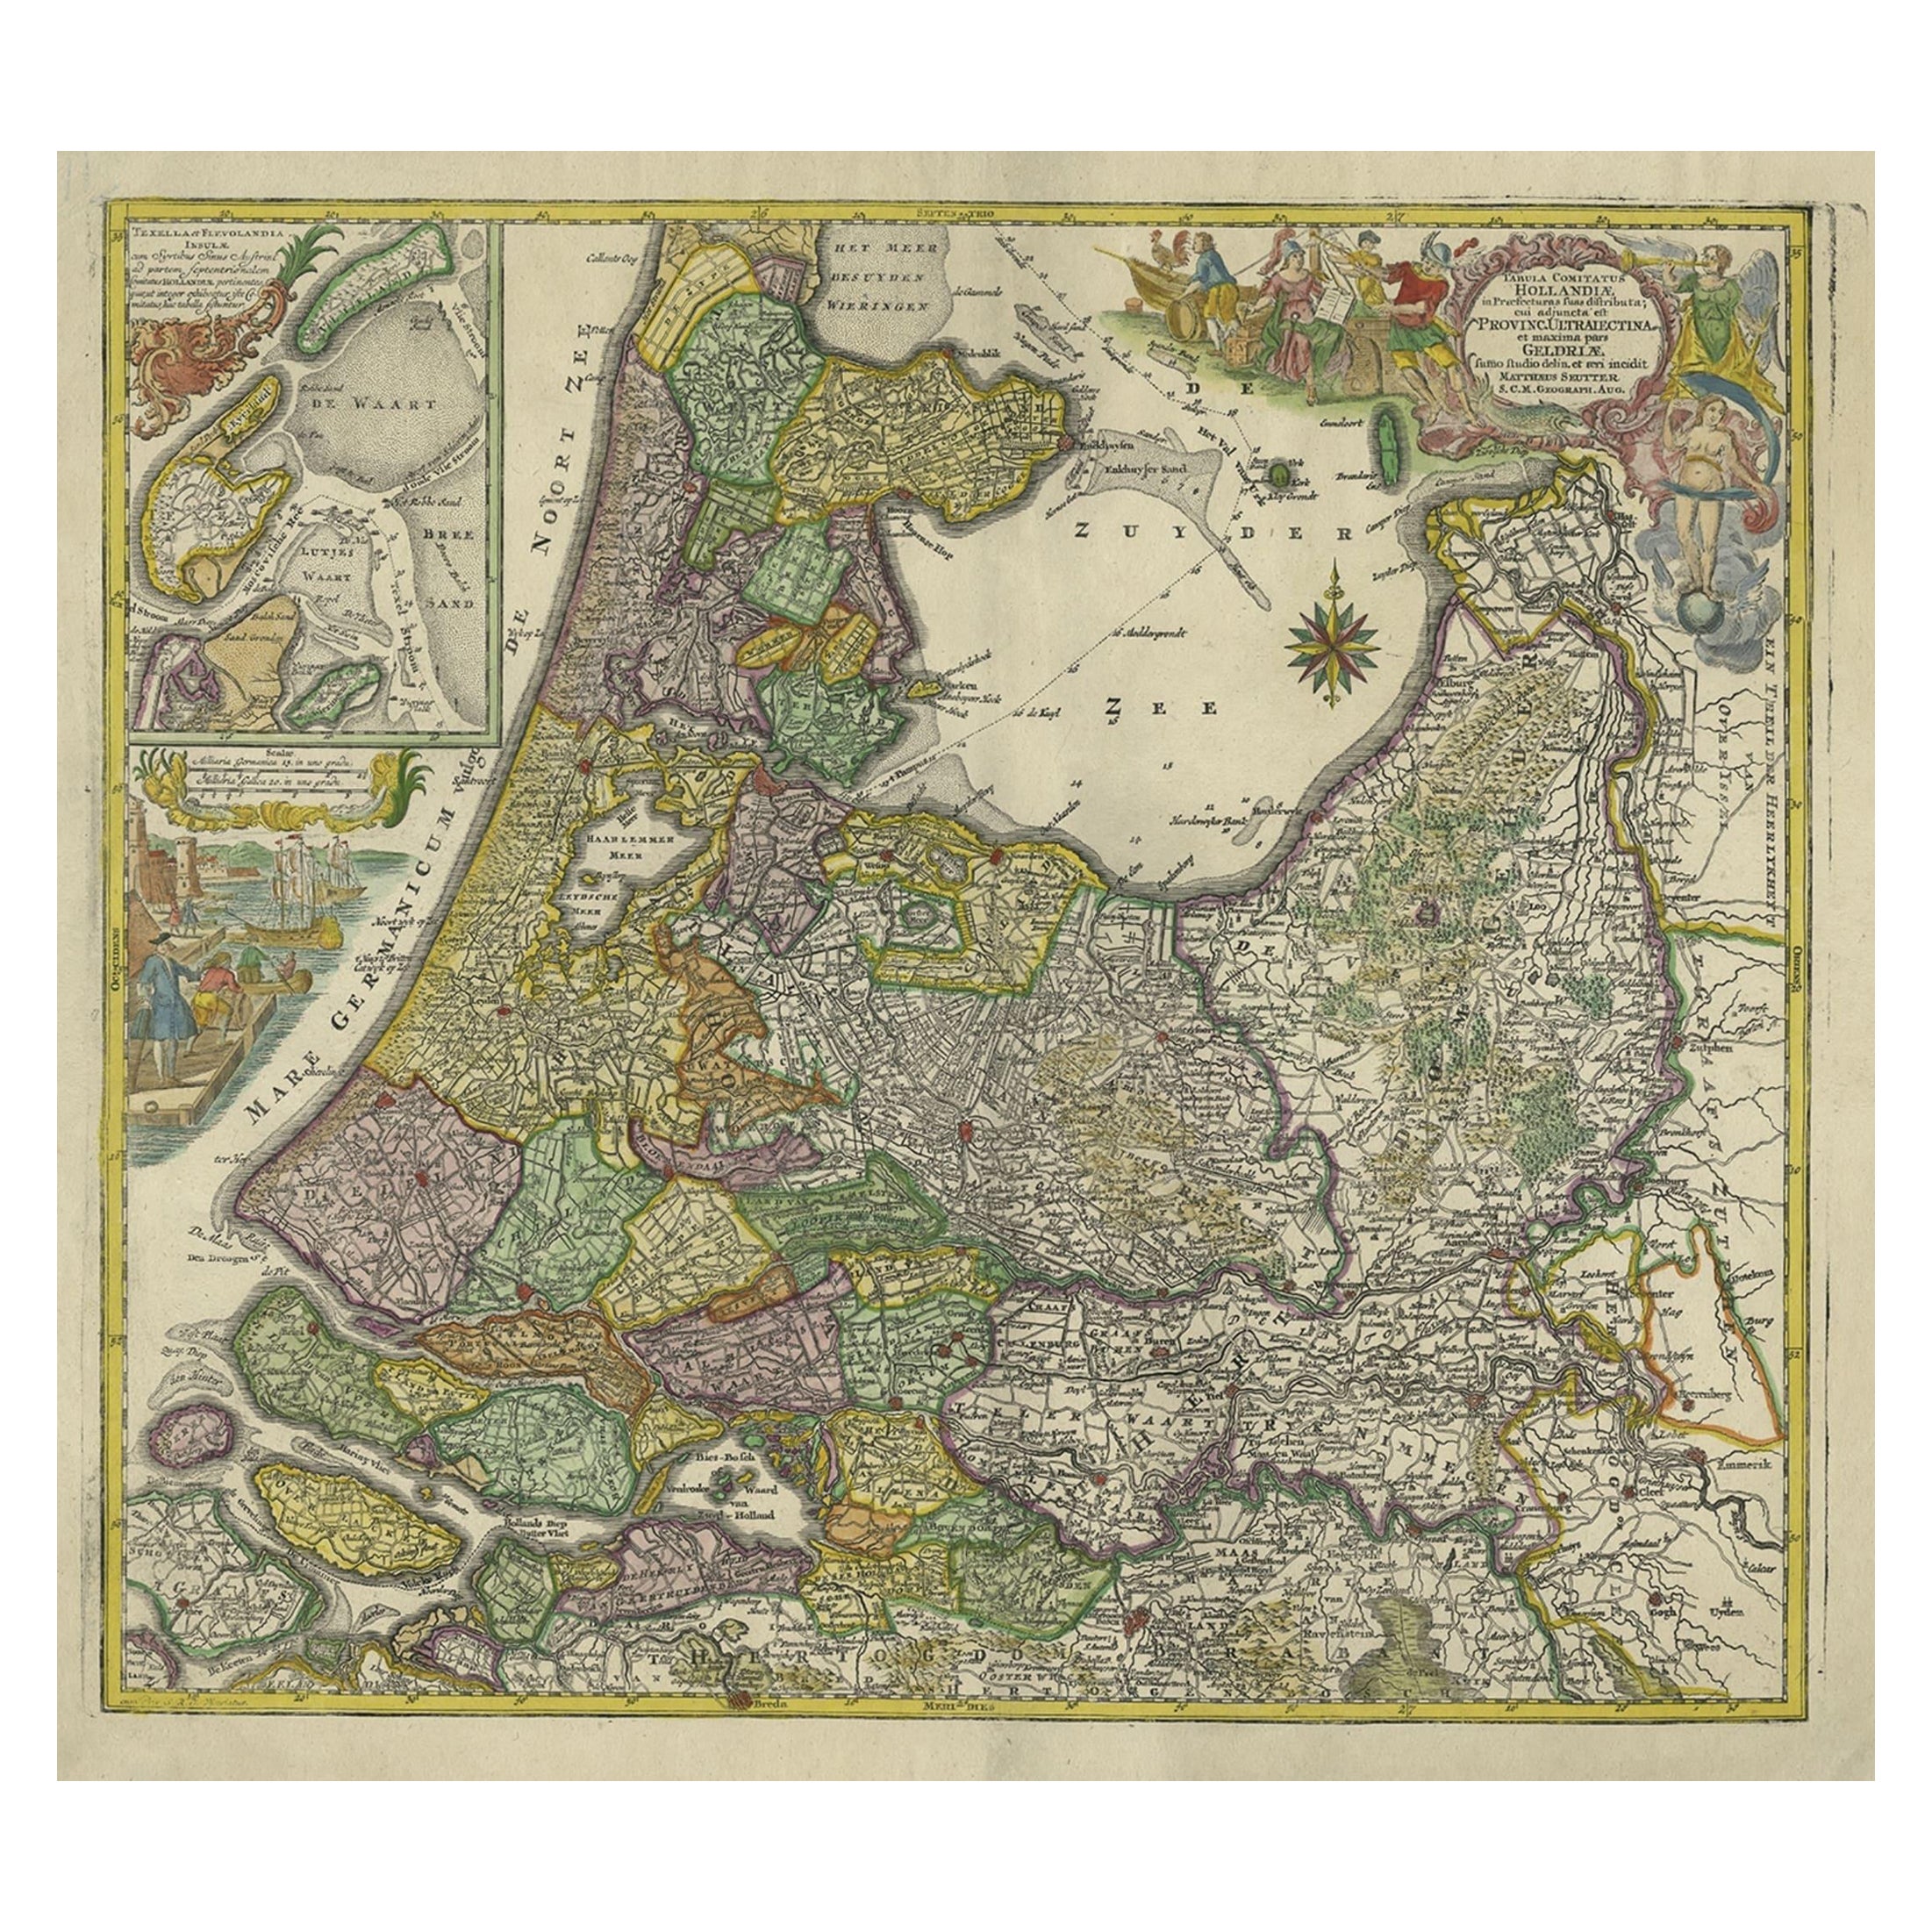 Antique Map of the Northwestern Netherlands, incl Texel and Vlieland, ca.1741